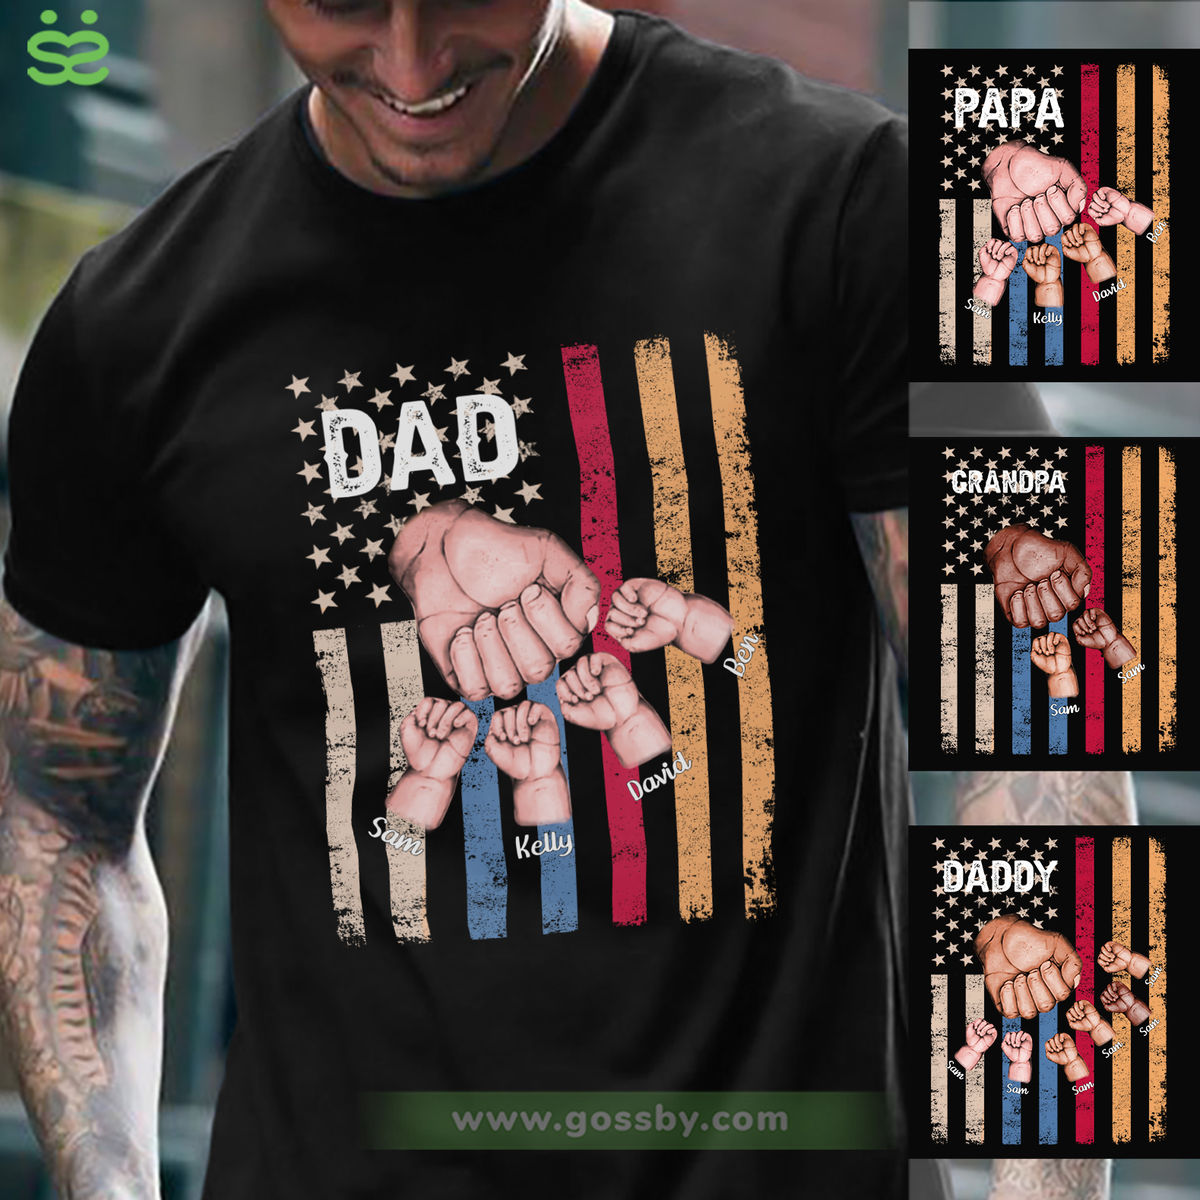 DAD T-shirt | Personalized Father's Day Shirts - Gossby